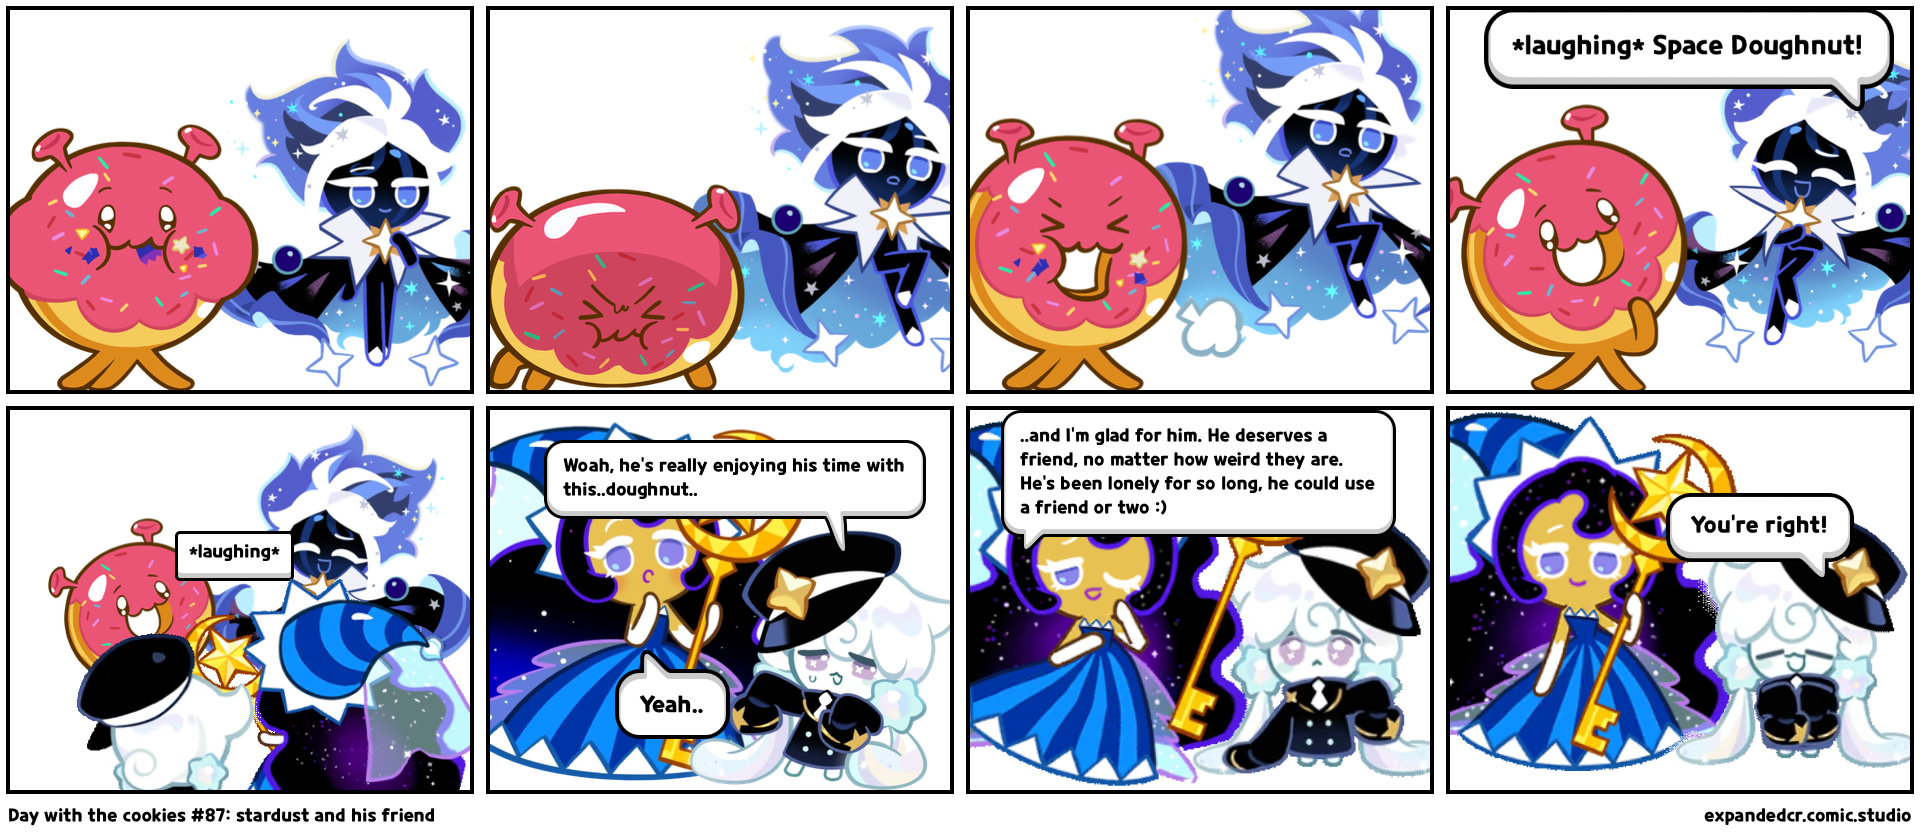 Day with the cookies #87: stardust and his friend